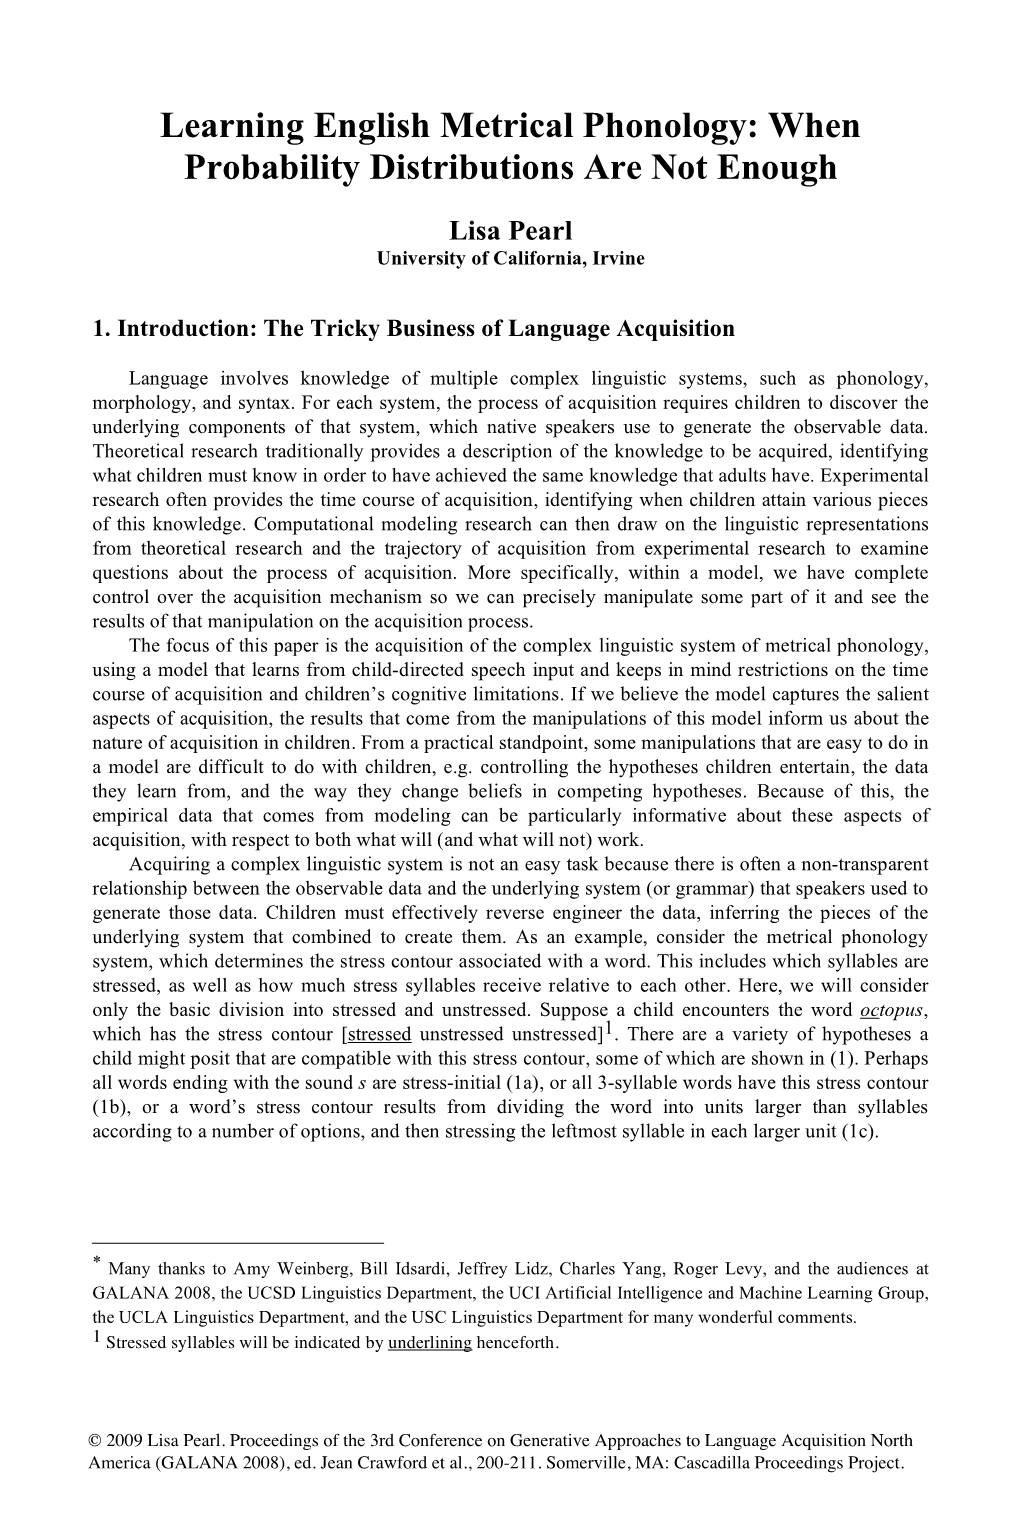 Learning English Metrical Phonology: When Probability Distributions Are Not Enough